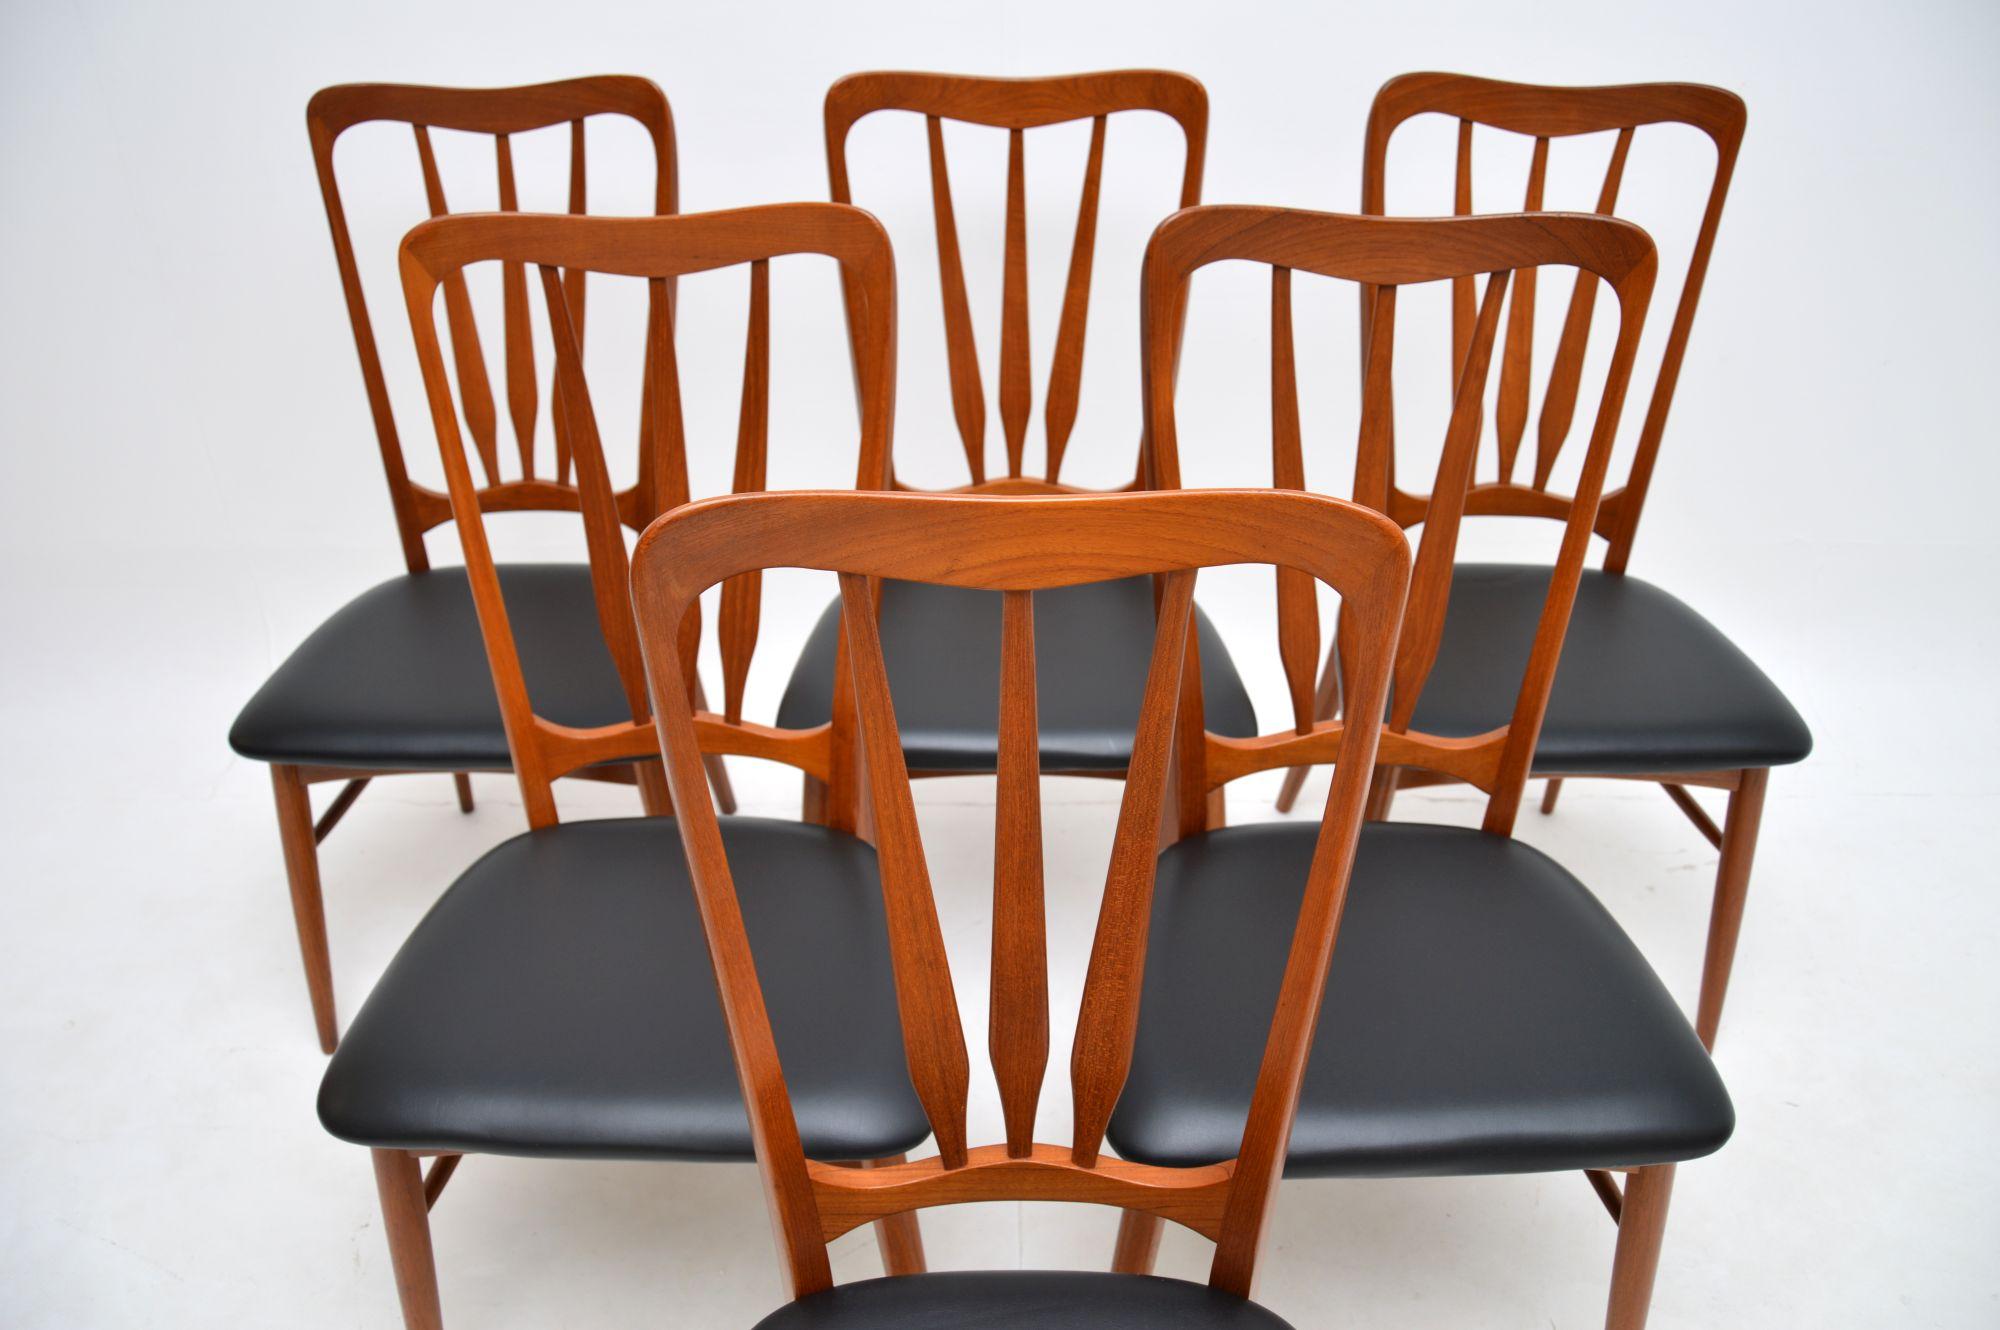 A stylish and extremely well made set of six Danish teak ‘Ingrid’ dining chairs by Niels Koefoed. They were made in Denmark, they date from the 1960’s.

The quality is outstanding, they have beautifully sculpted back rests and sit on finely tapered